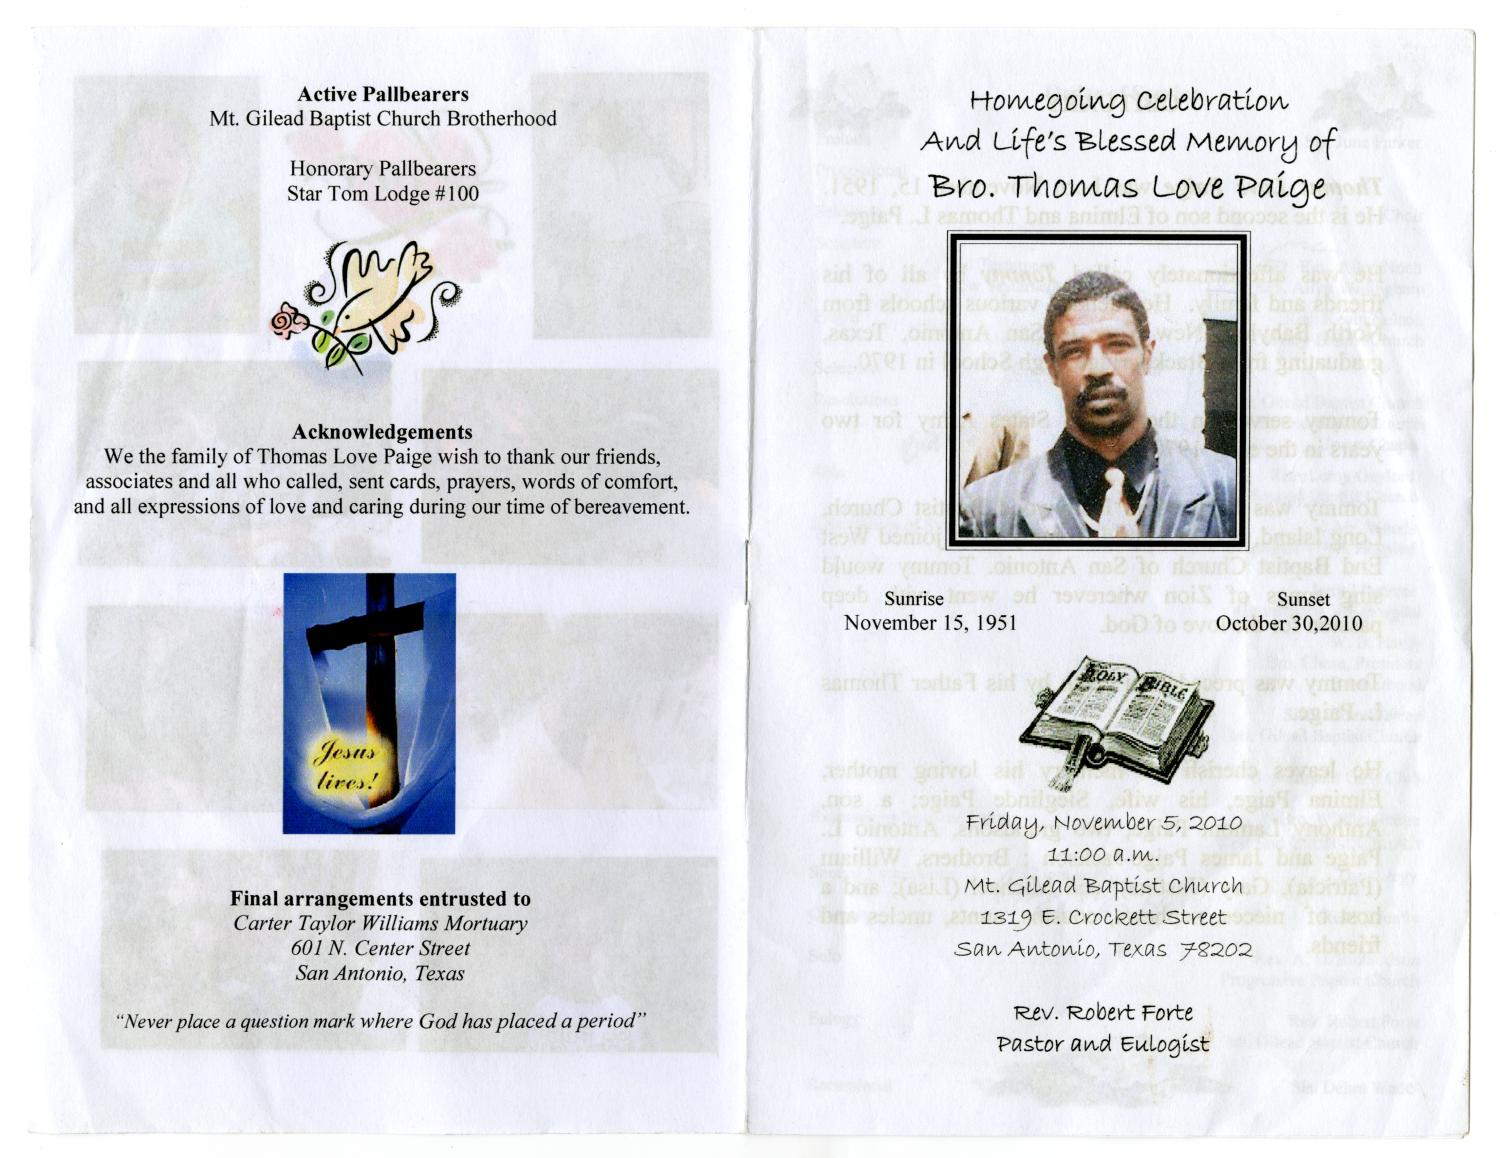 [Funeral Program for Thomas Love Paige, November 5, 2010]
                                                
                                                    [Sequence #]: 5 of 5
                                                